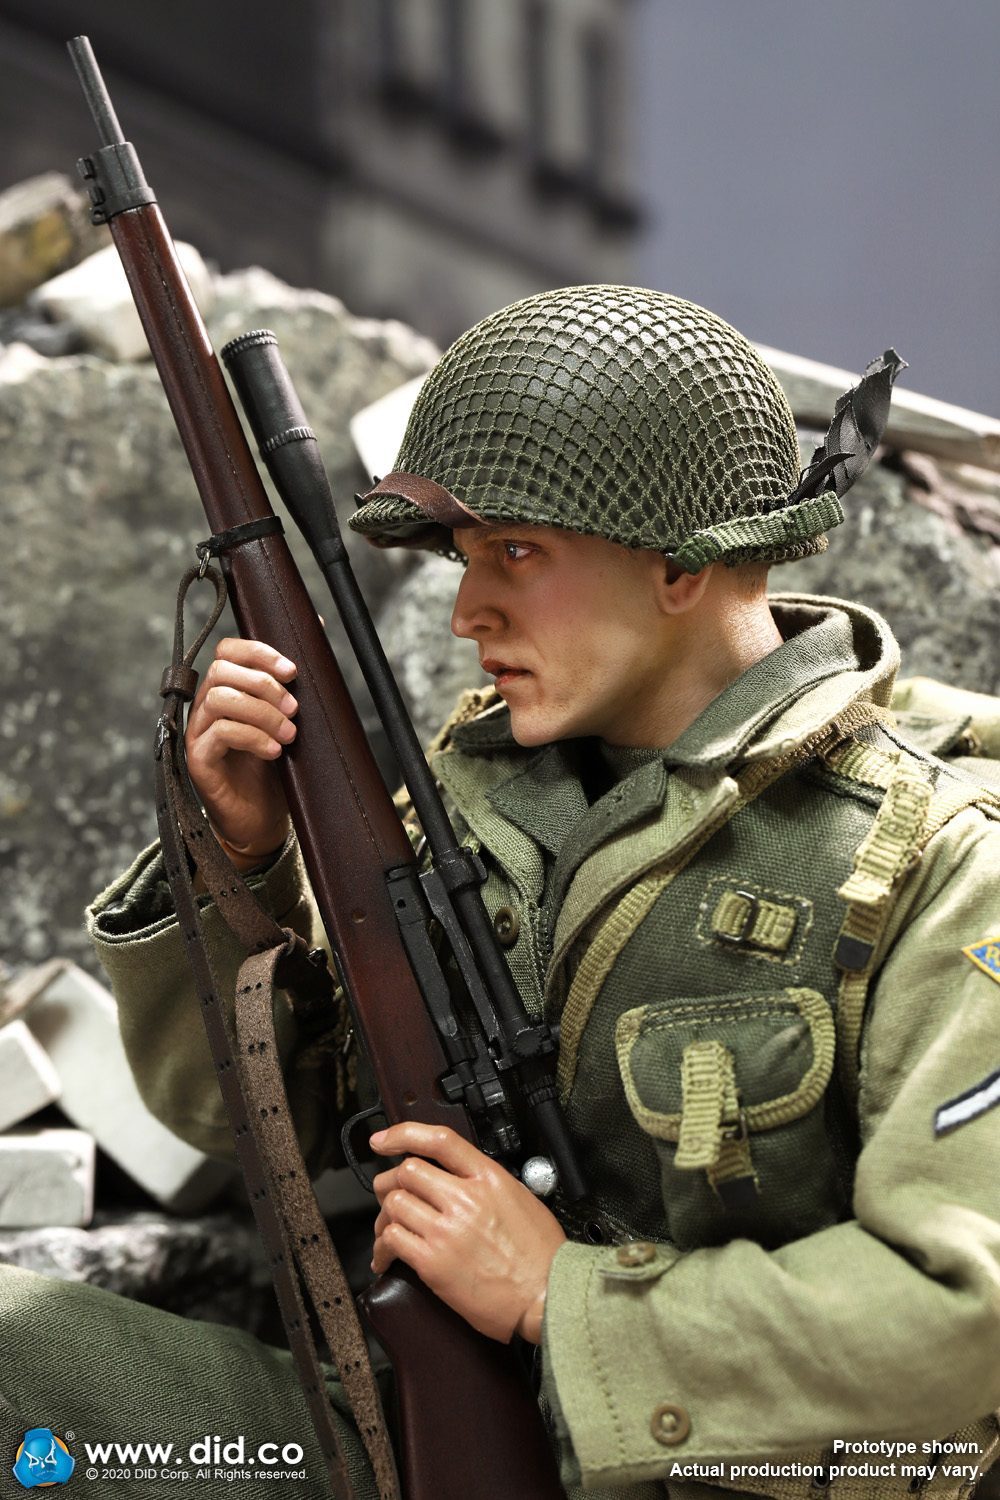 PrivateJackson - NEW PRODUCT: DiD: A80144 WWII US 2nd Ranger Battalion Series 4 Private Jackson 2937